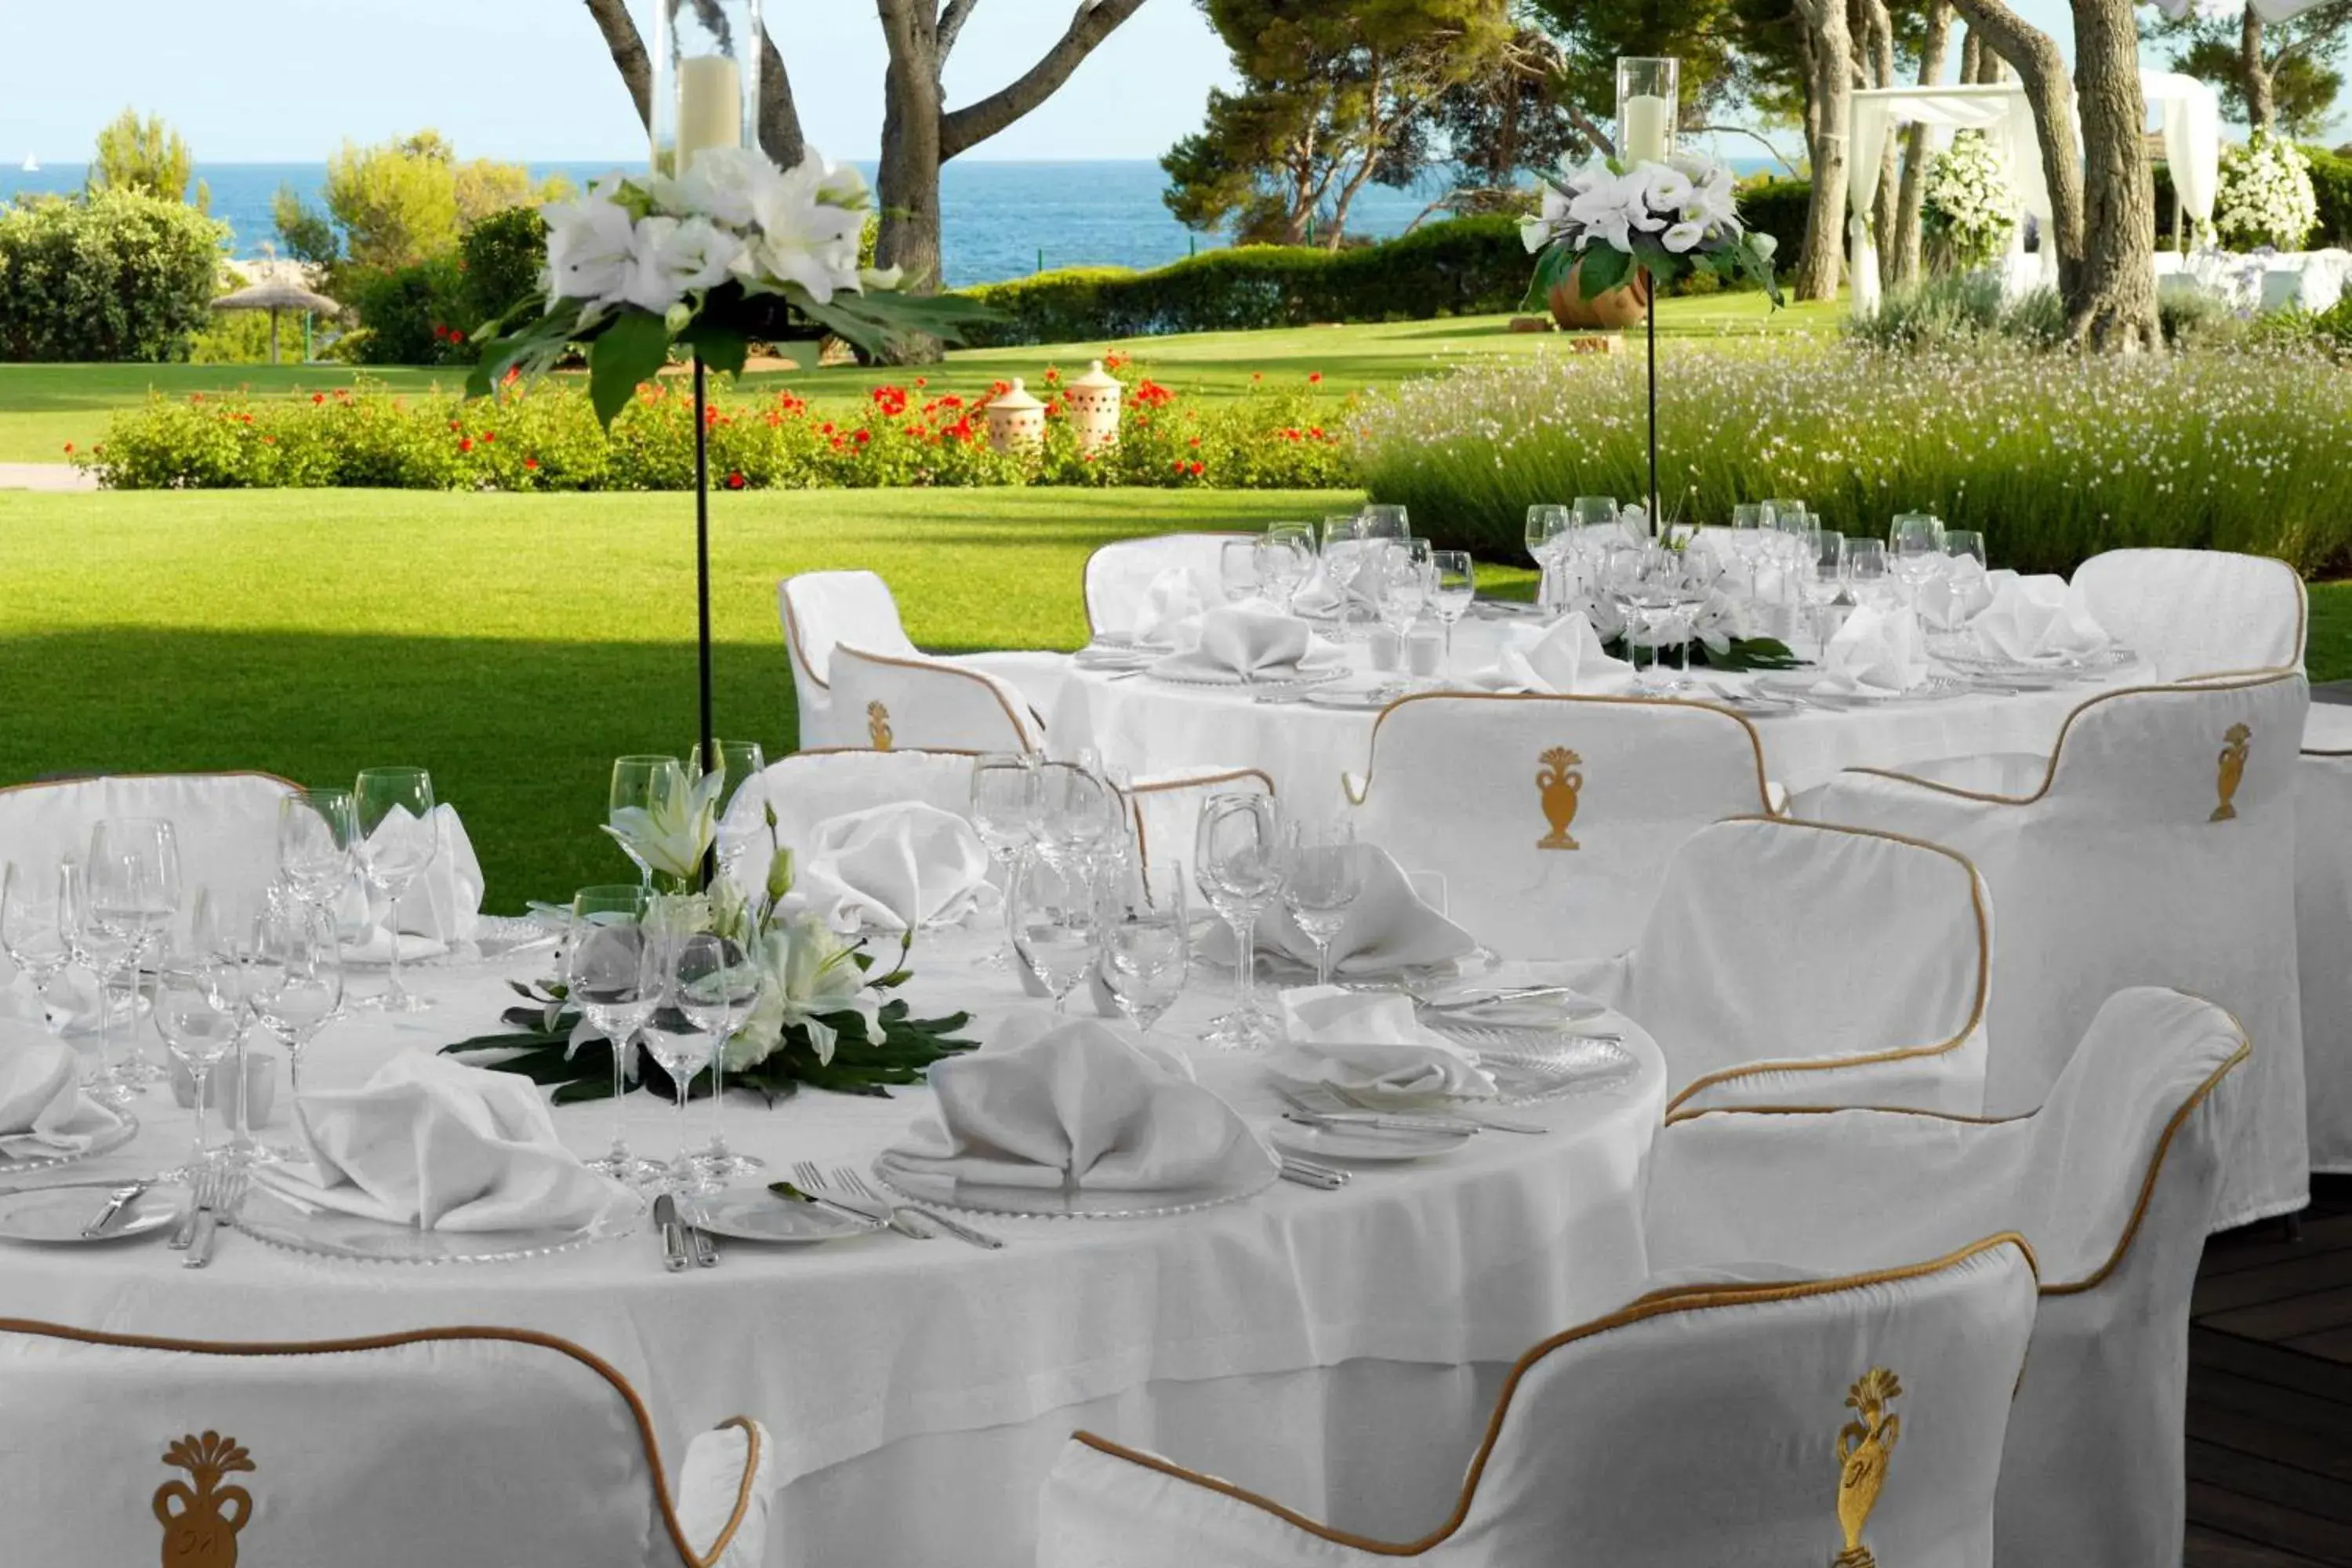 Meeting/conference room, Banquet Facilities in The St. Regis Mardavall Mallorca Resort